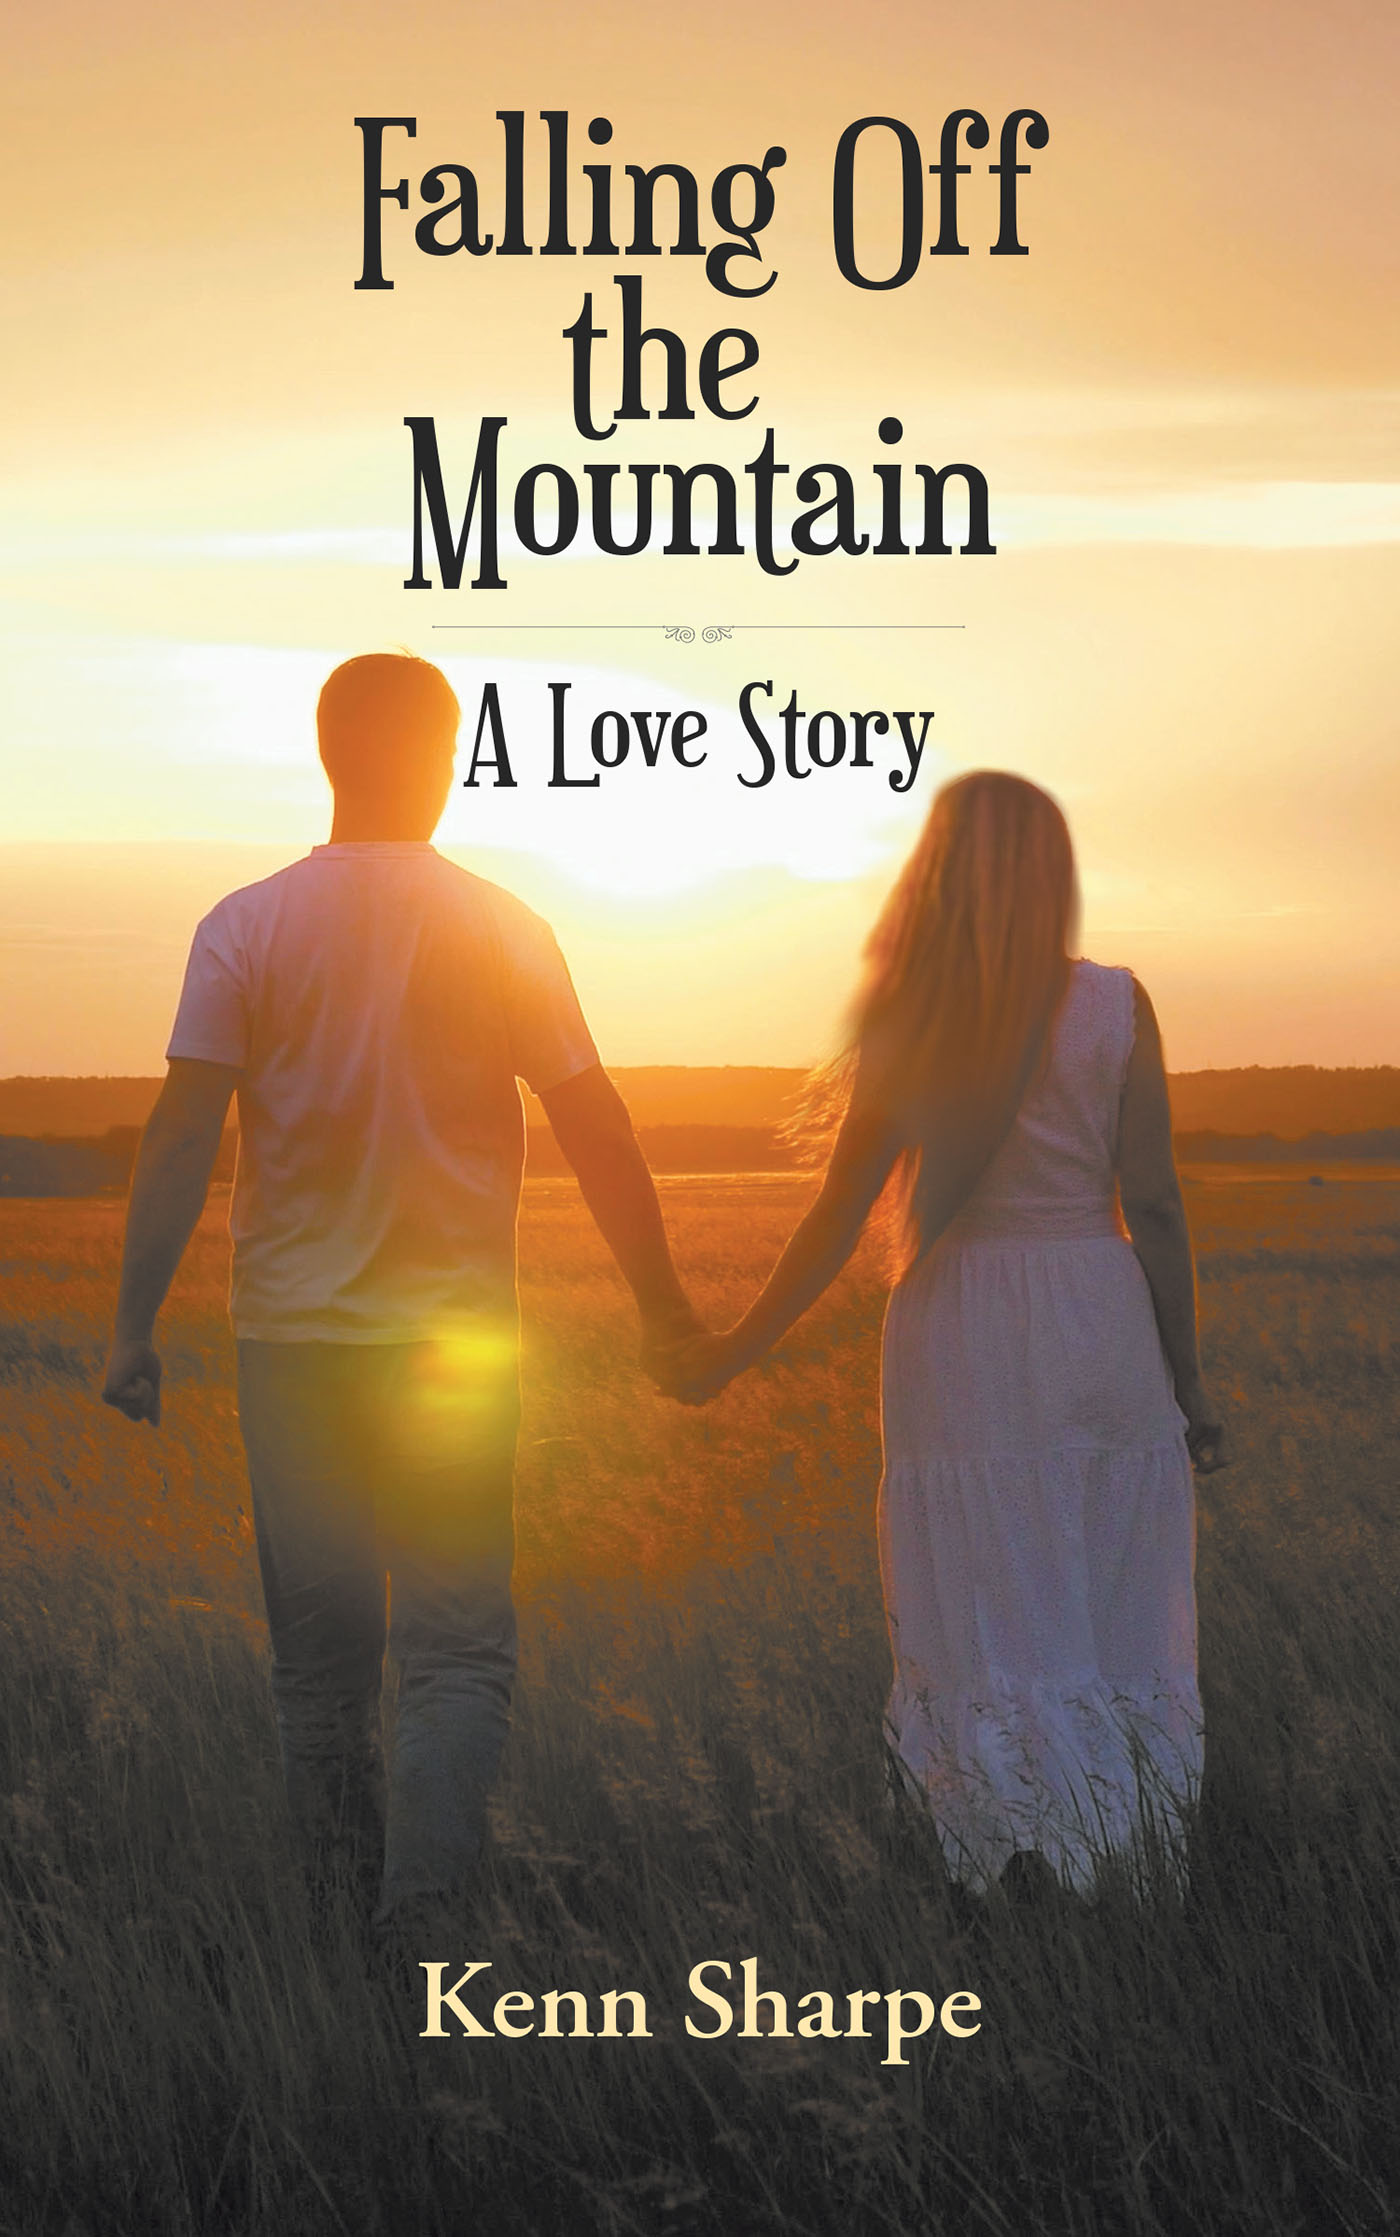 Author Kenn Sharpe’s New Book, "Falling Off the Mountain: A Love Story," is a Beautiful Tale of a Naval Captain Who Unexpectedly Finds the One Thing Missing in His Life